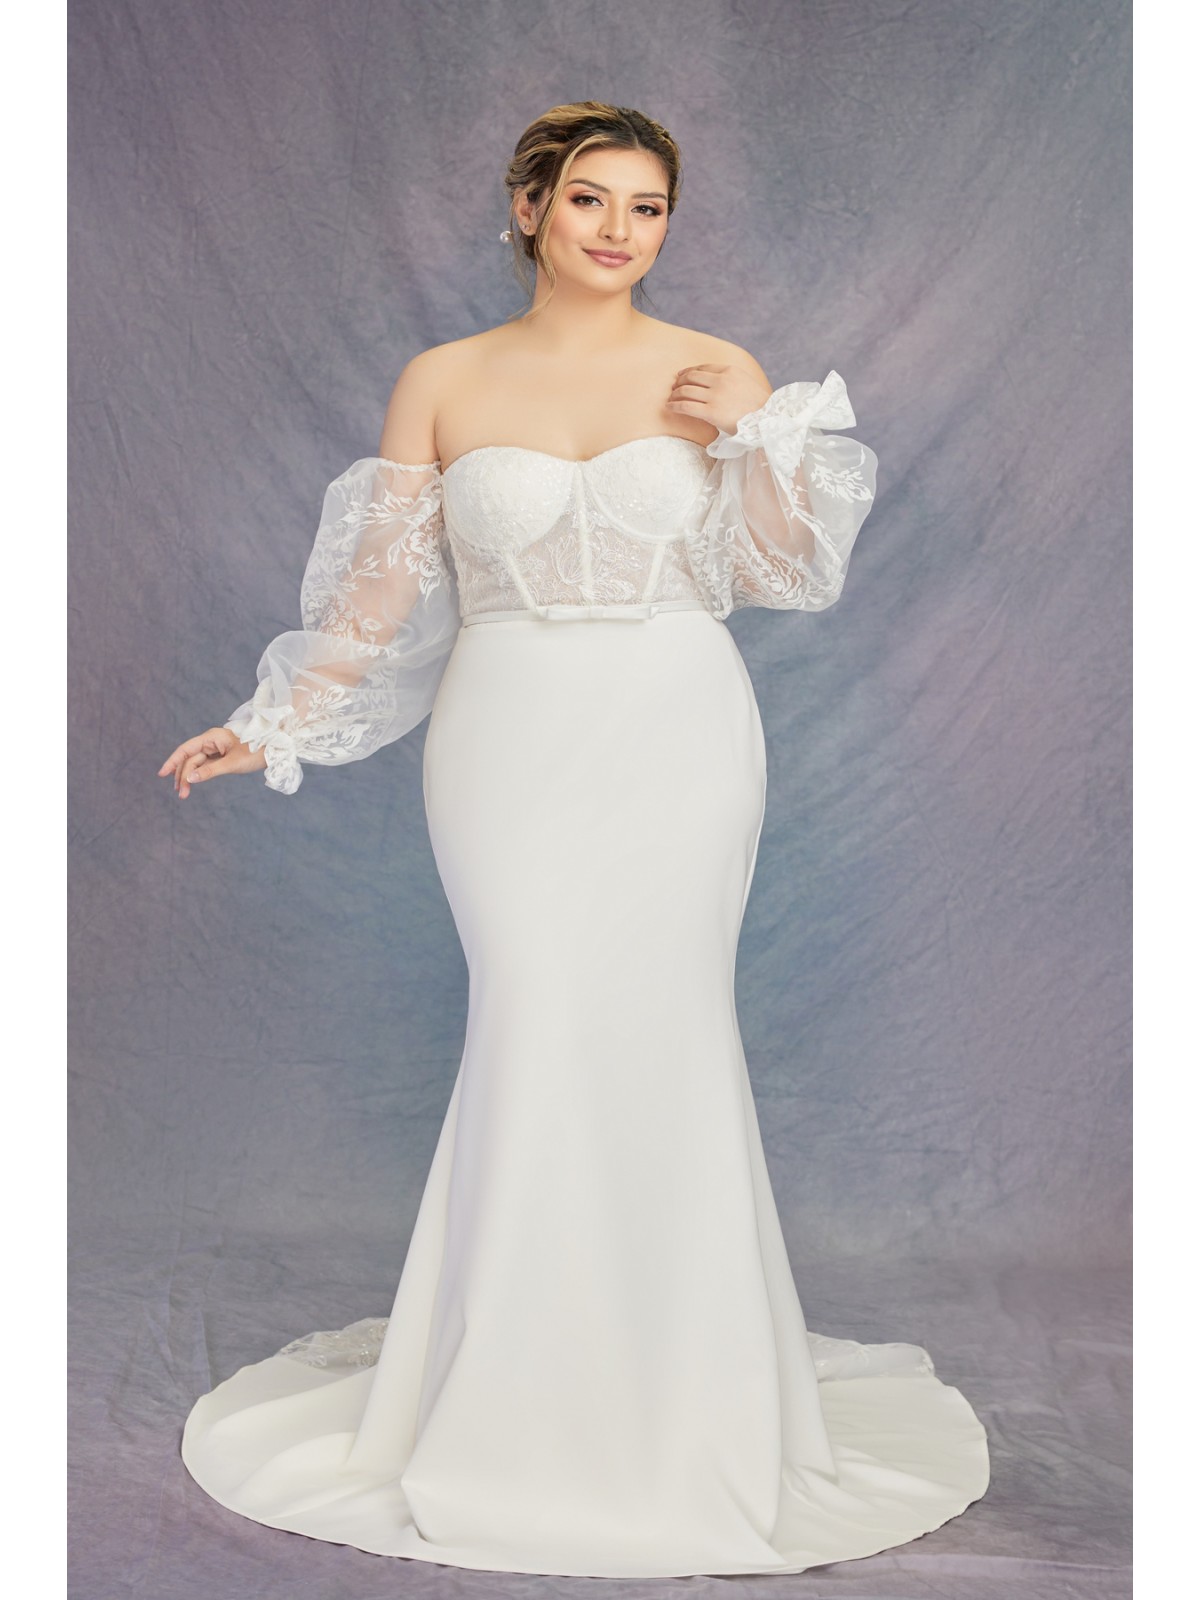 Fitted & Flare Sweetheart Sequined Over-lace Corset Wedding Dress - Plus Size  - CB-F1001P